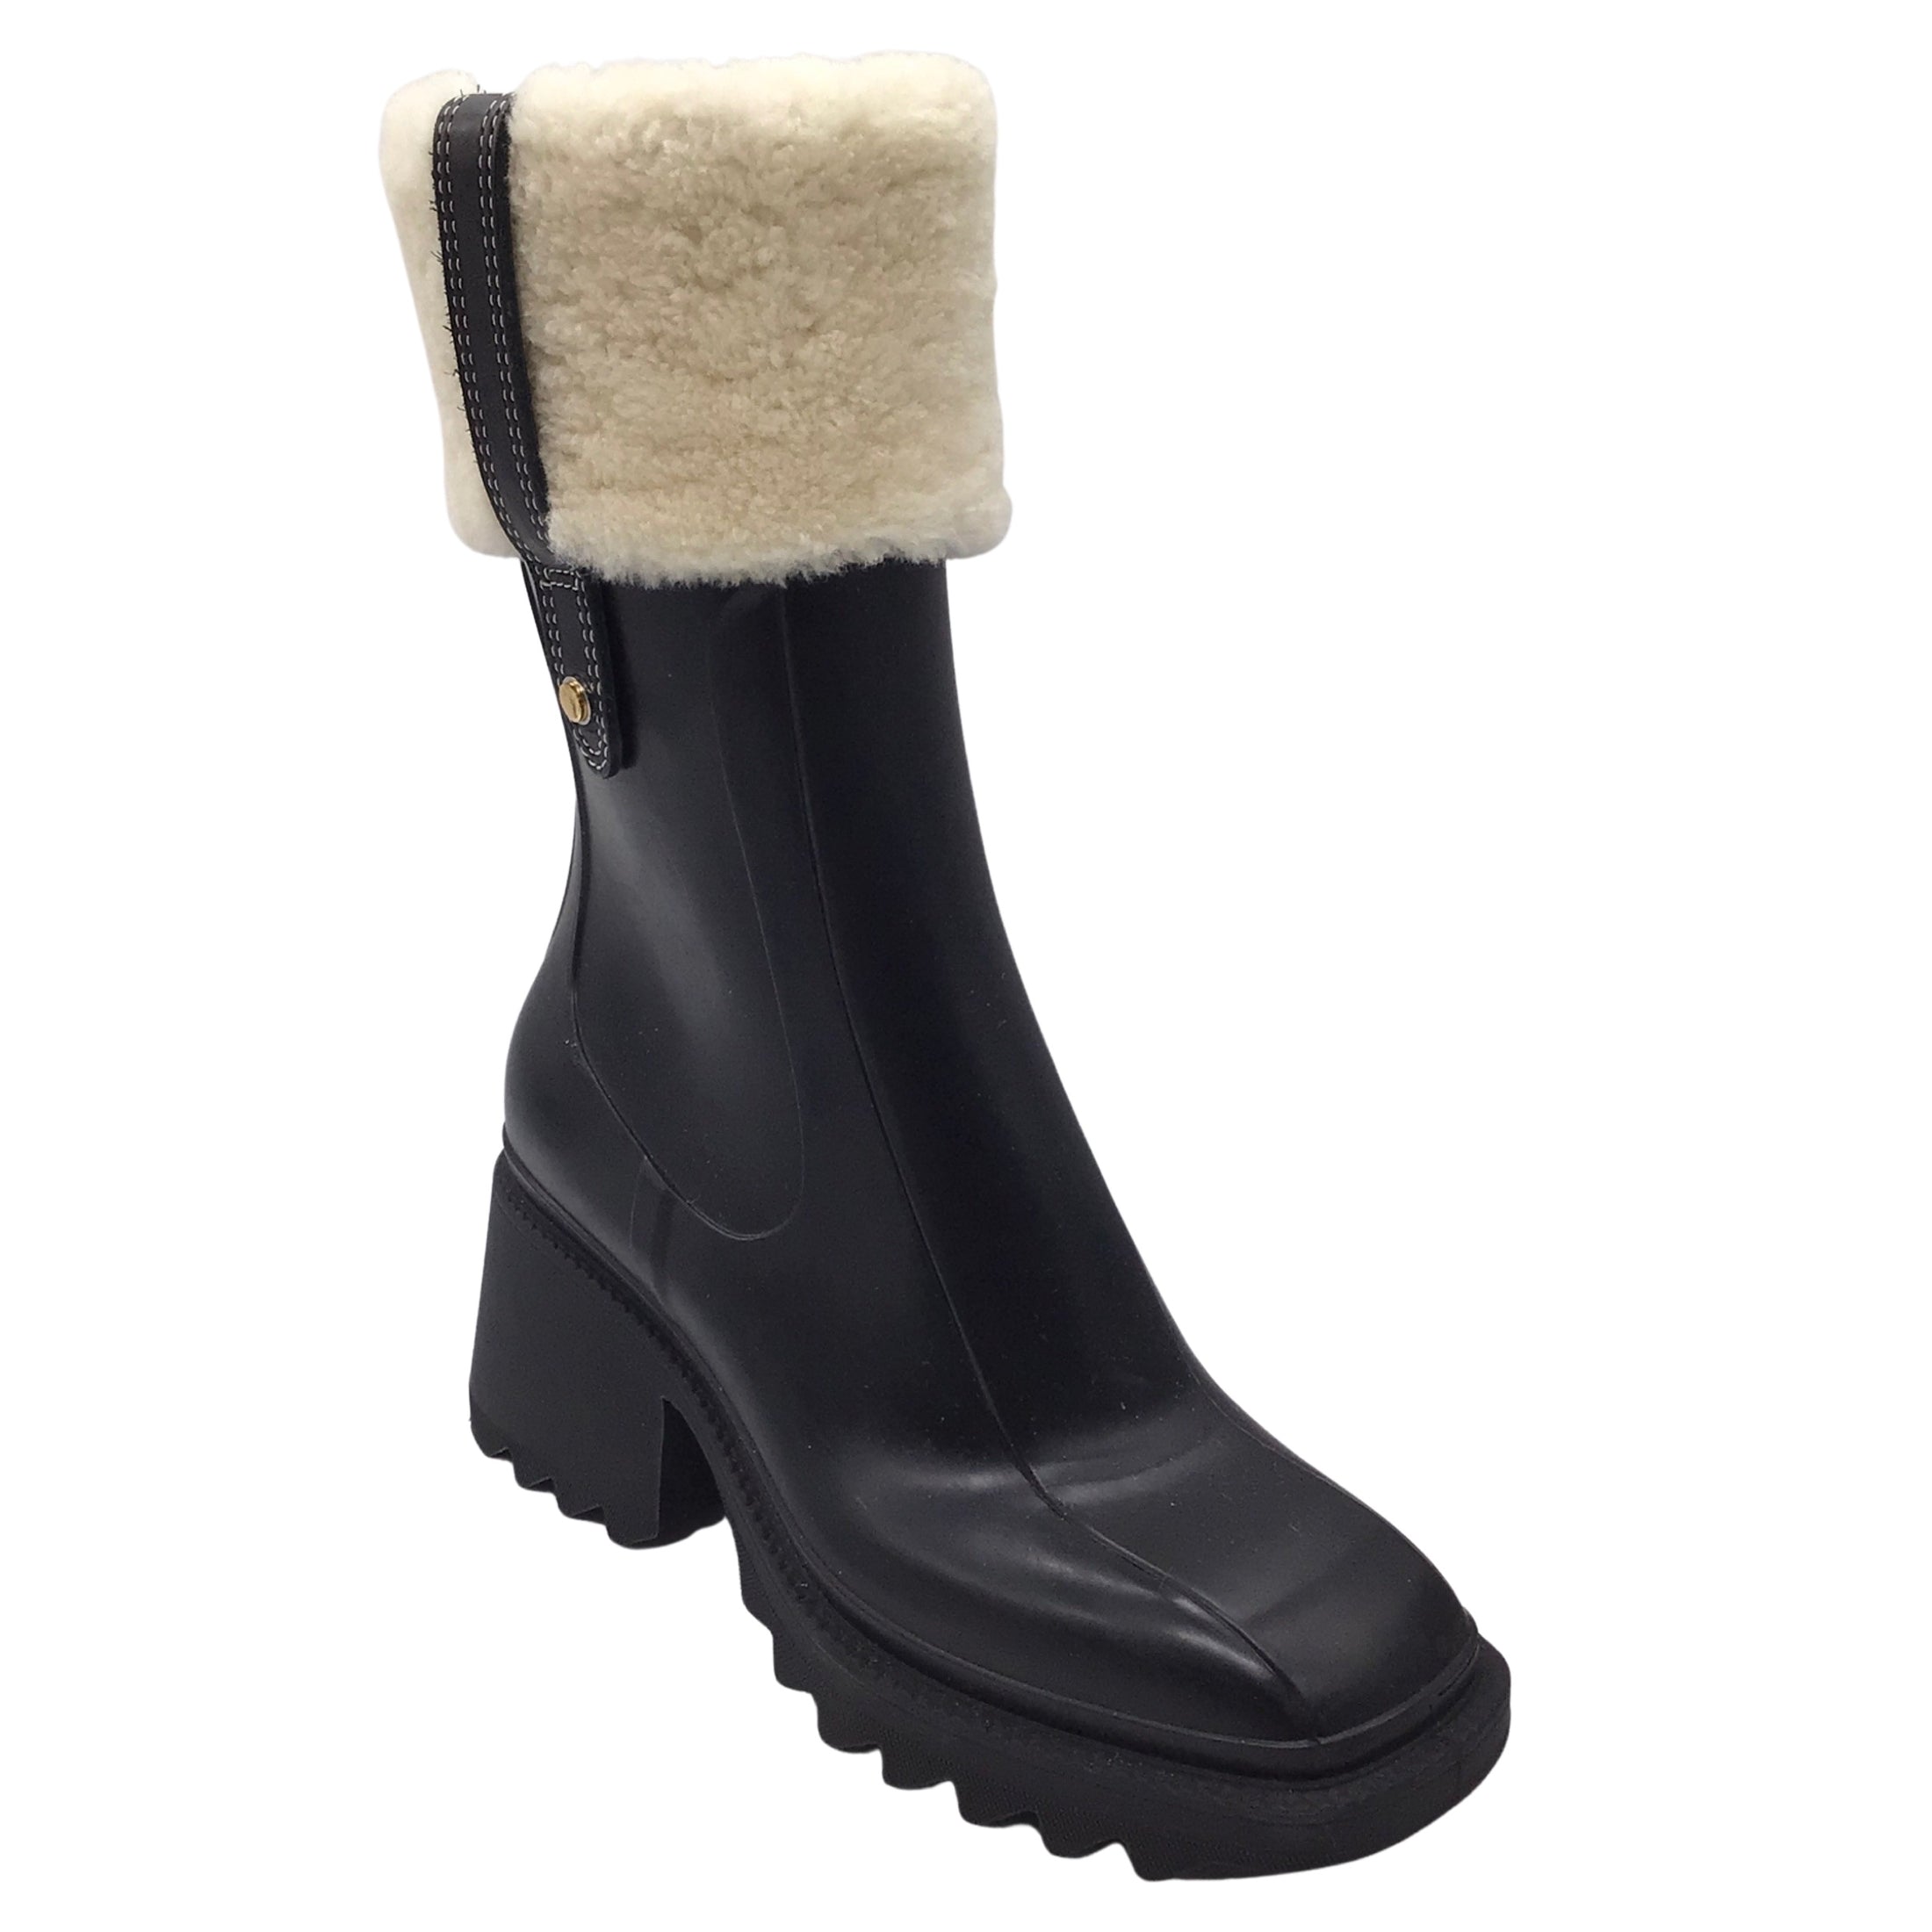 Chloe Betty Black / Ivory Shearling Trimmed Rubber Boots